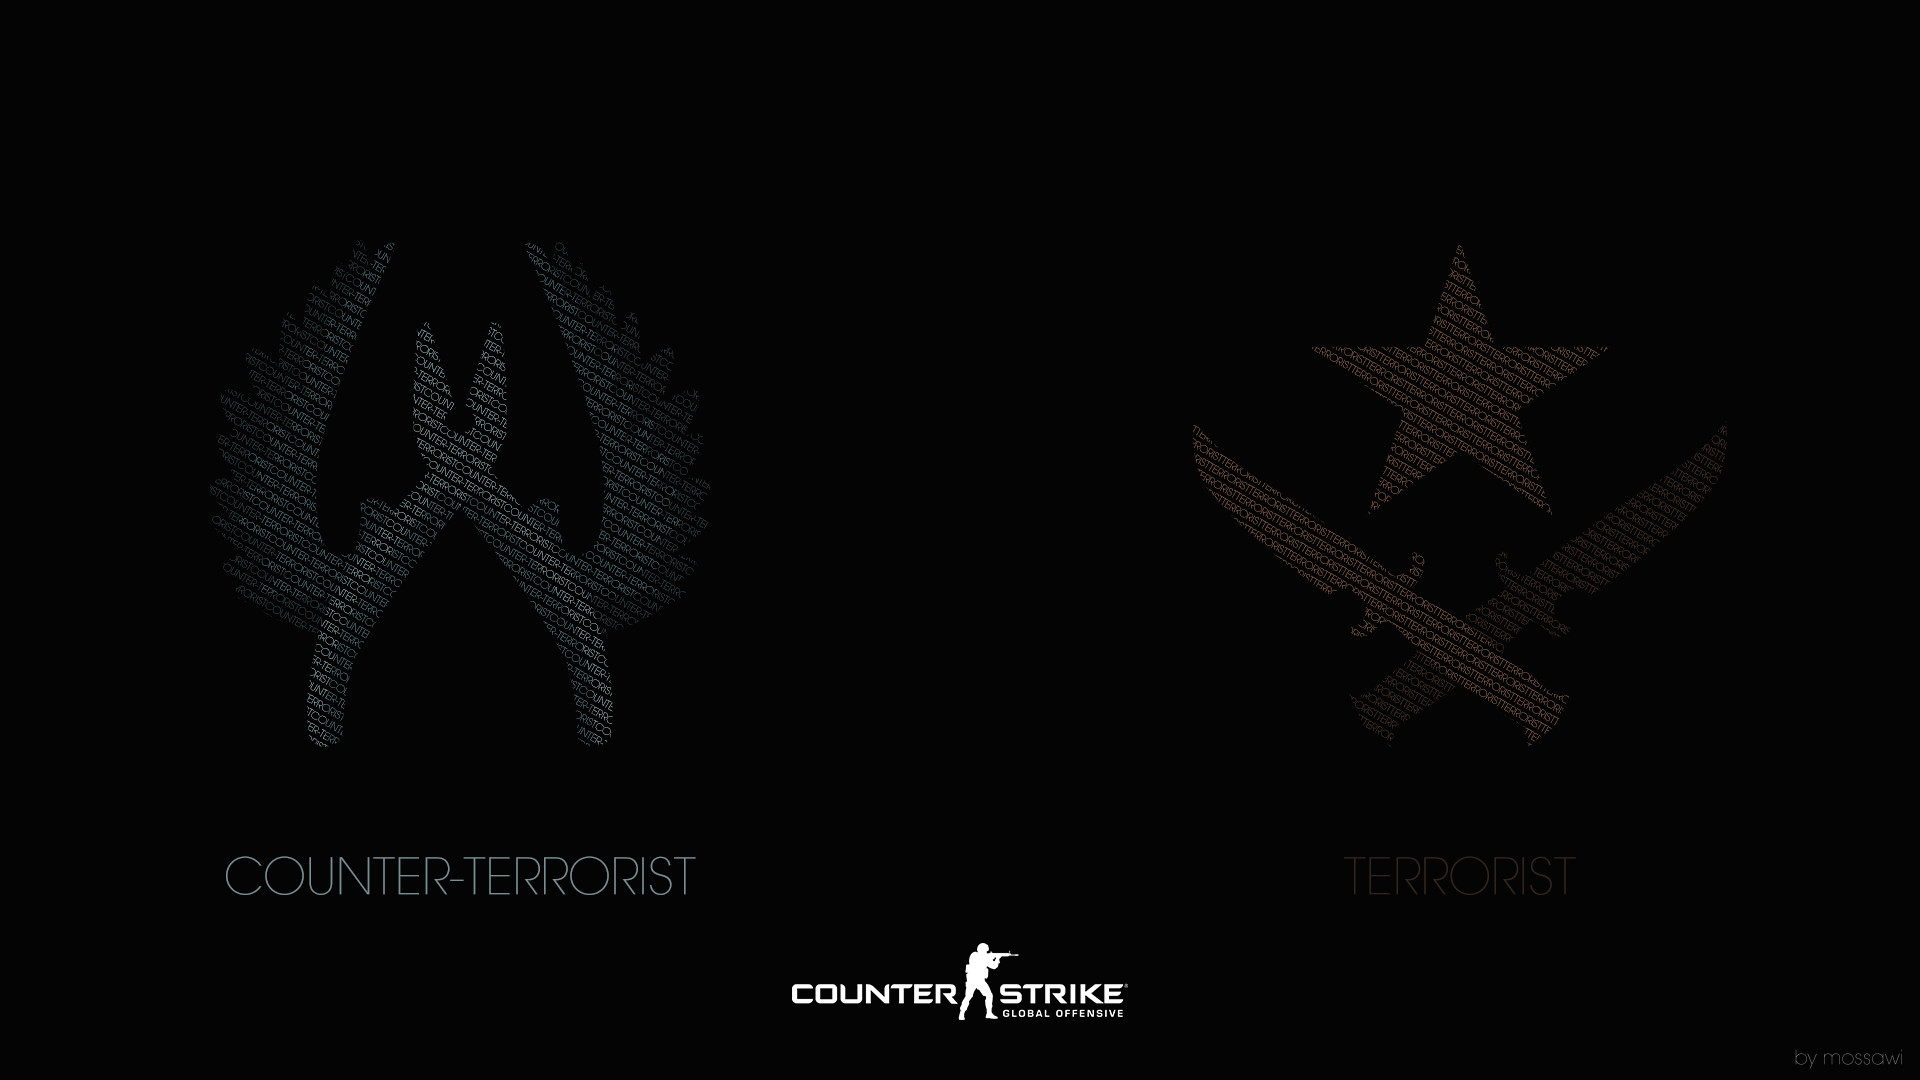 1920x1080 http://mossawi.nl/csgo/assets/images/original/ct_t_background.png